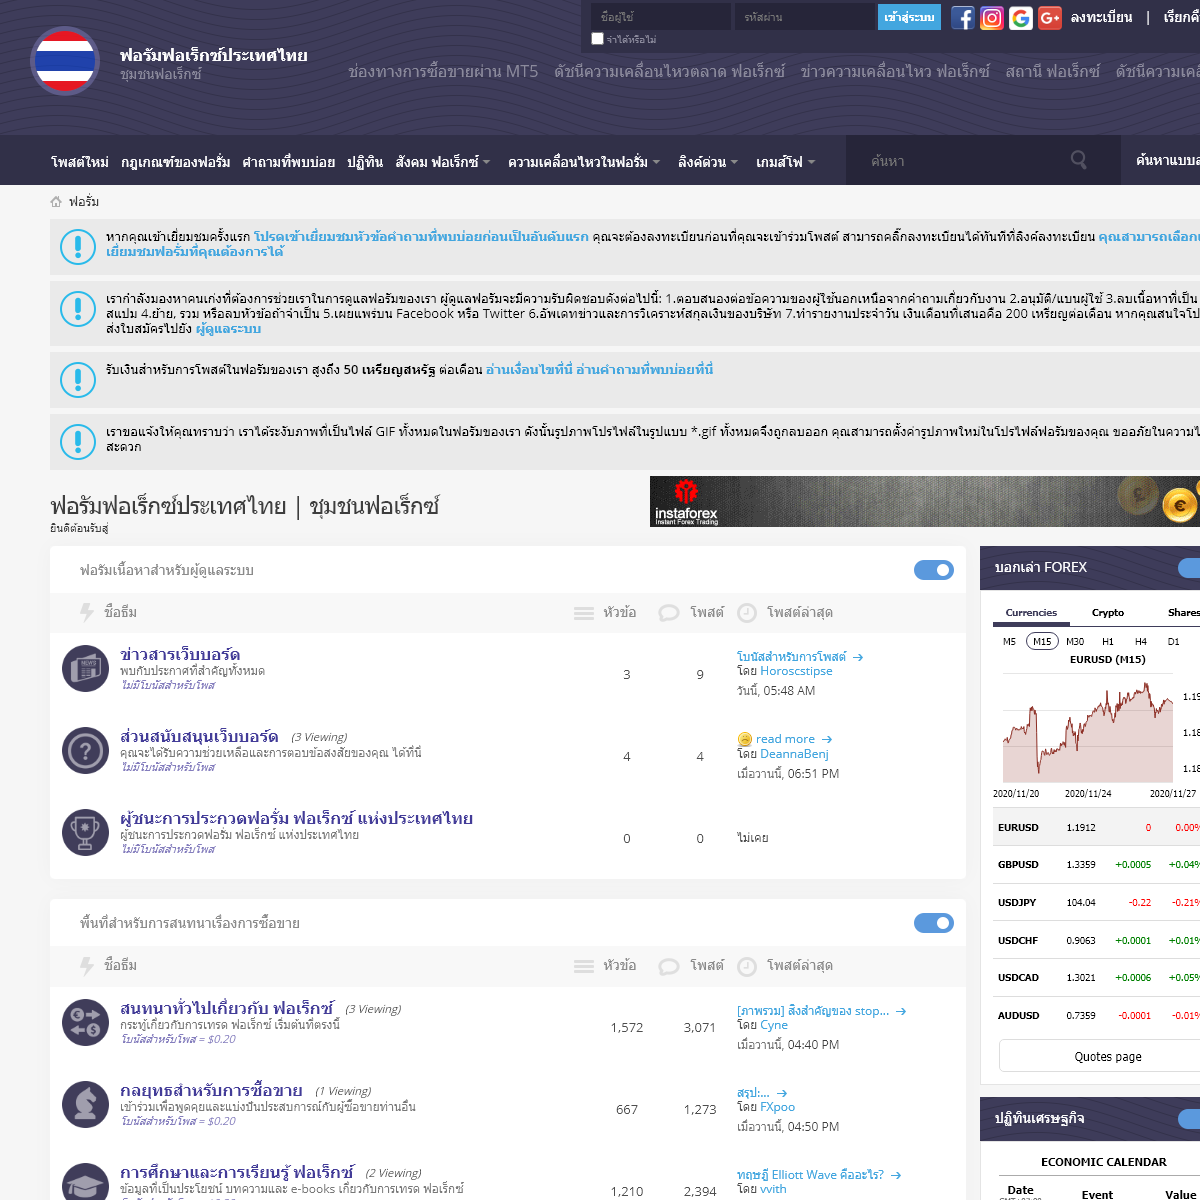 A complete backup of thailand-forex.com